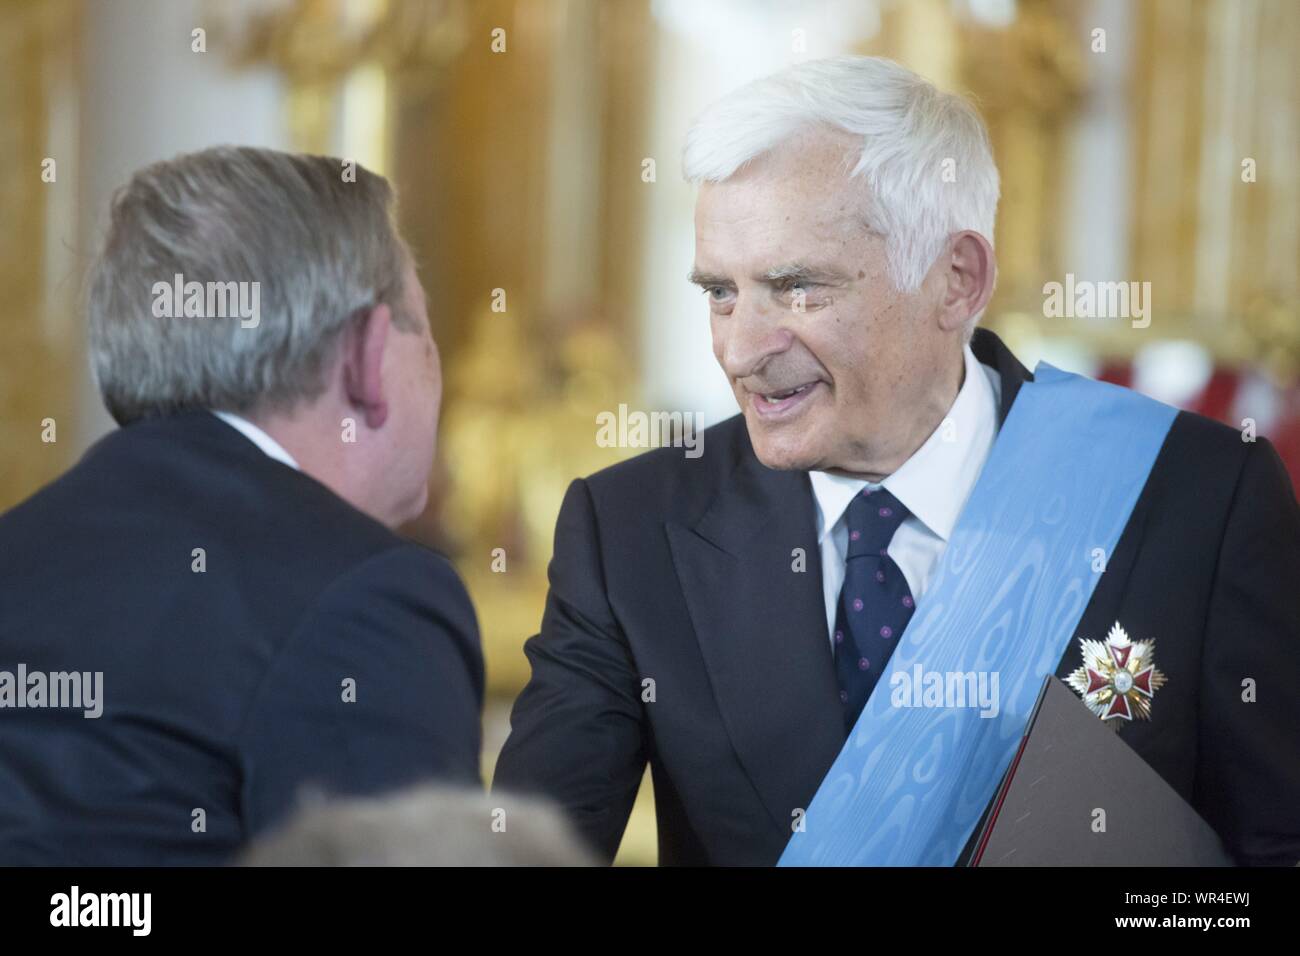 Aug. 6, 2015 Warsaw, presidential inauguration in Poland: Andrzej Duda sworn in as new Polish president. Receiving the insignia of orders at the Royal Stock Photo